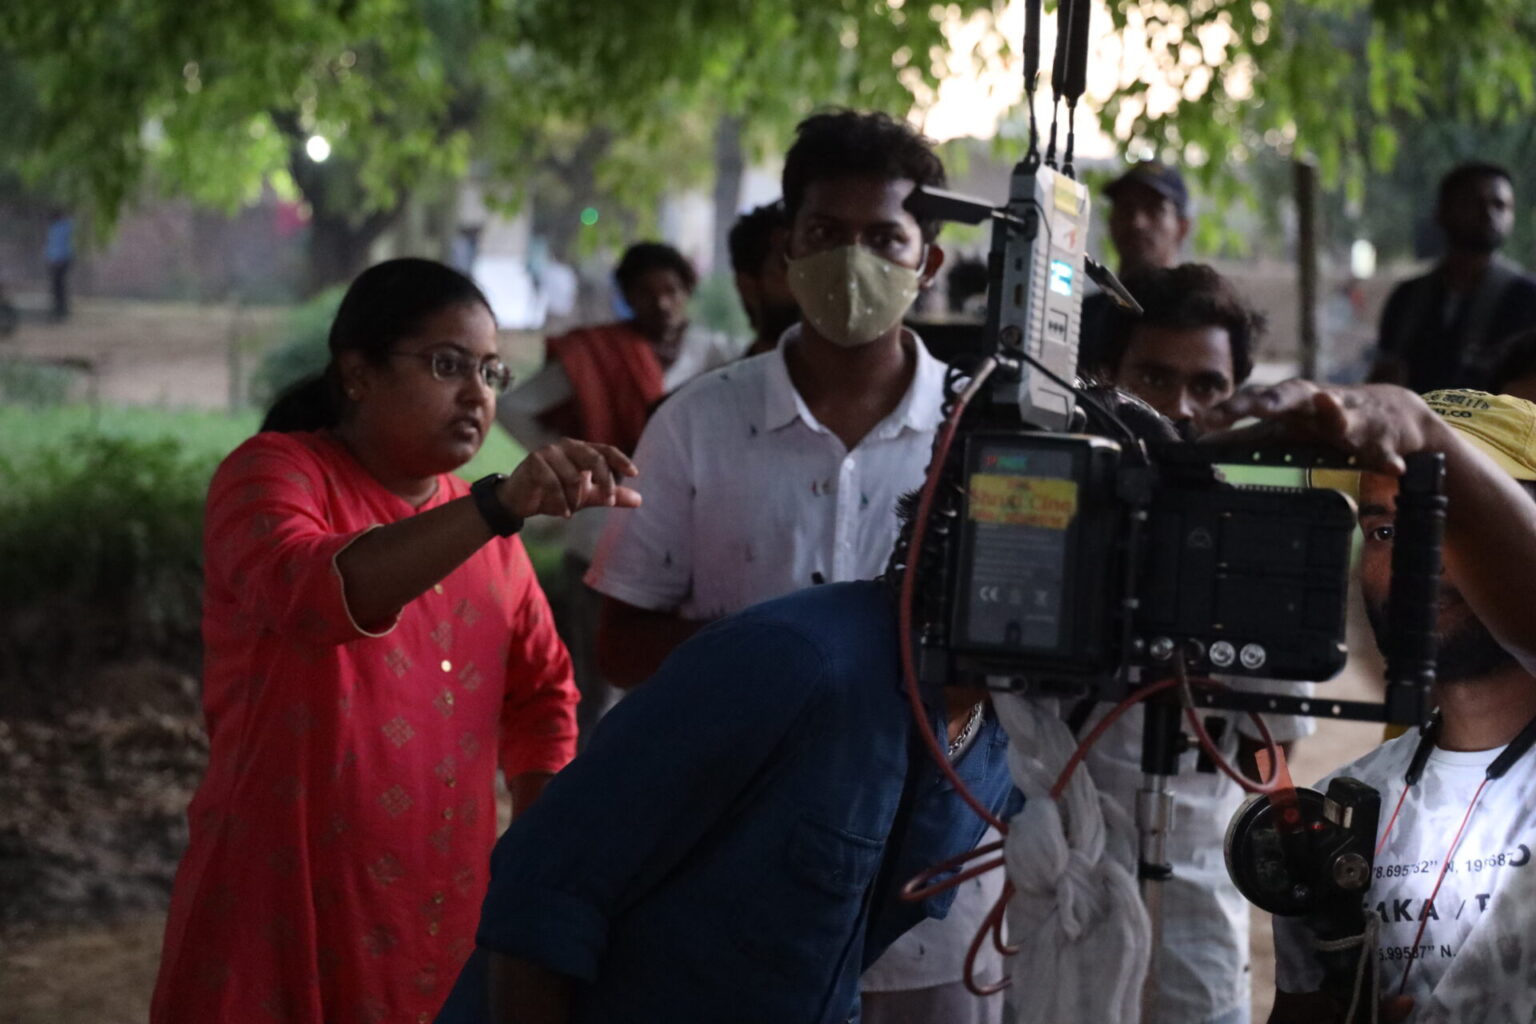 "The mission of Jeevi Films is to tell humanistic stories, especially those of third-world cinema, and bring them to the world, find audiences, and create spaces for such stories for the sake of the world itself." Pictured: Producer Bhavana Goparaju. Photo courtesy of Bhavana Goparaju.